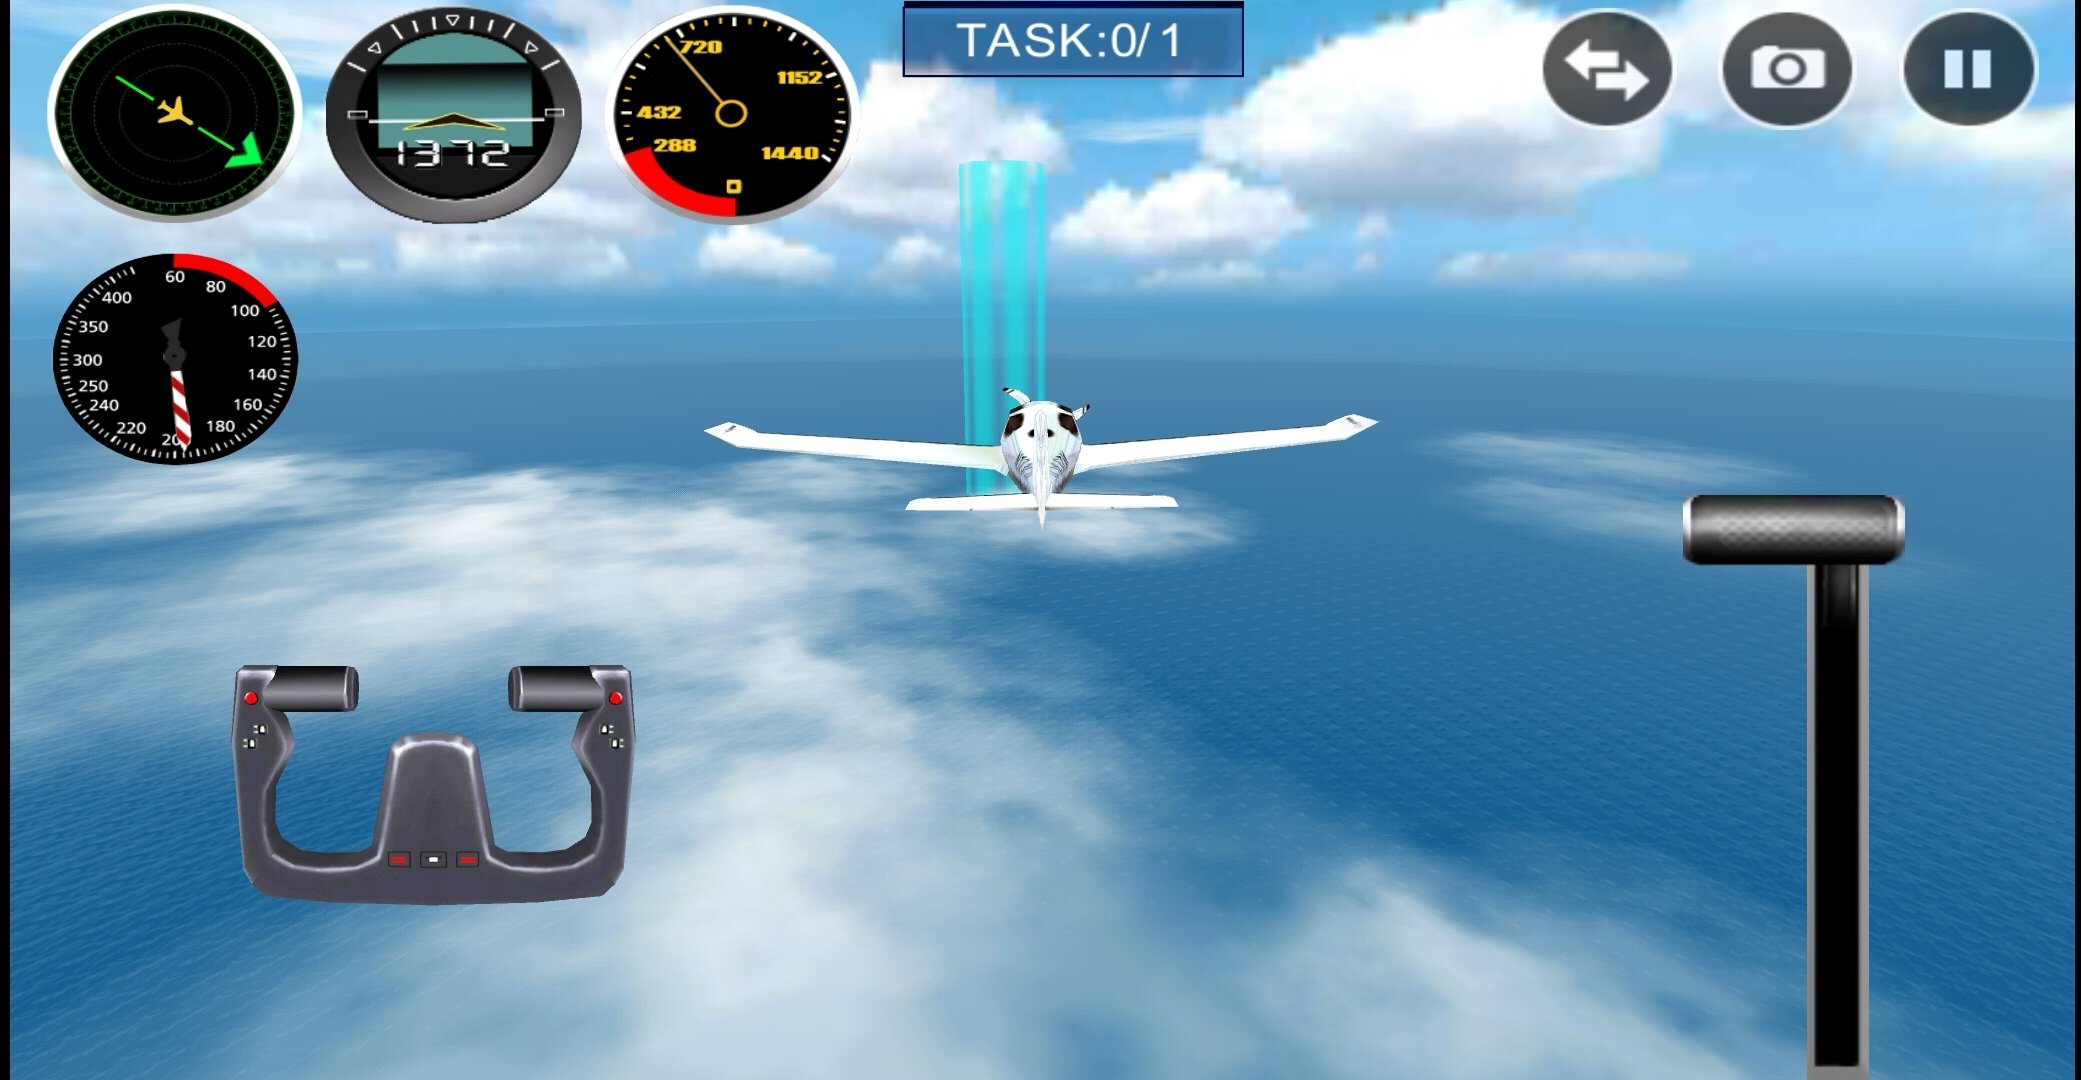 Voopter - Passagens Aéreas para Android - Download